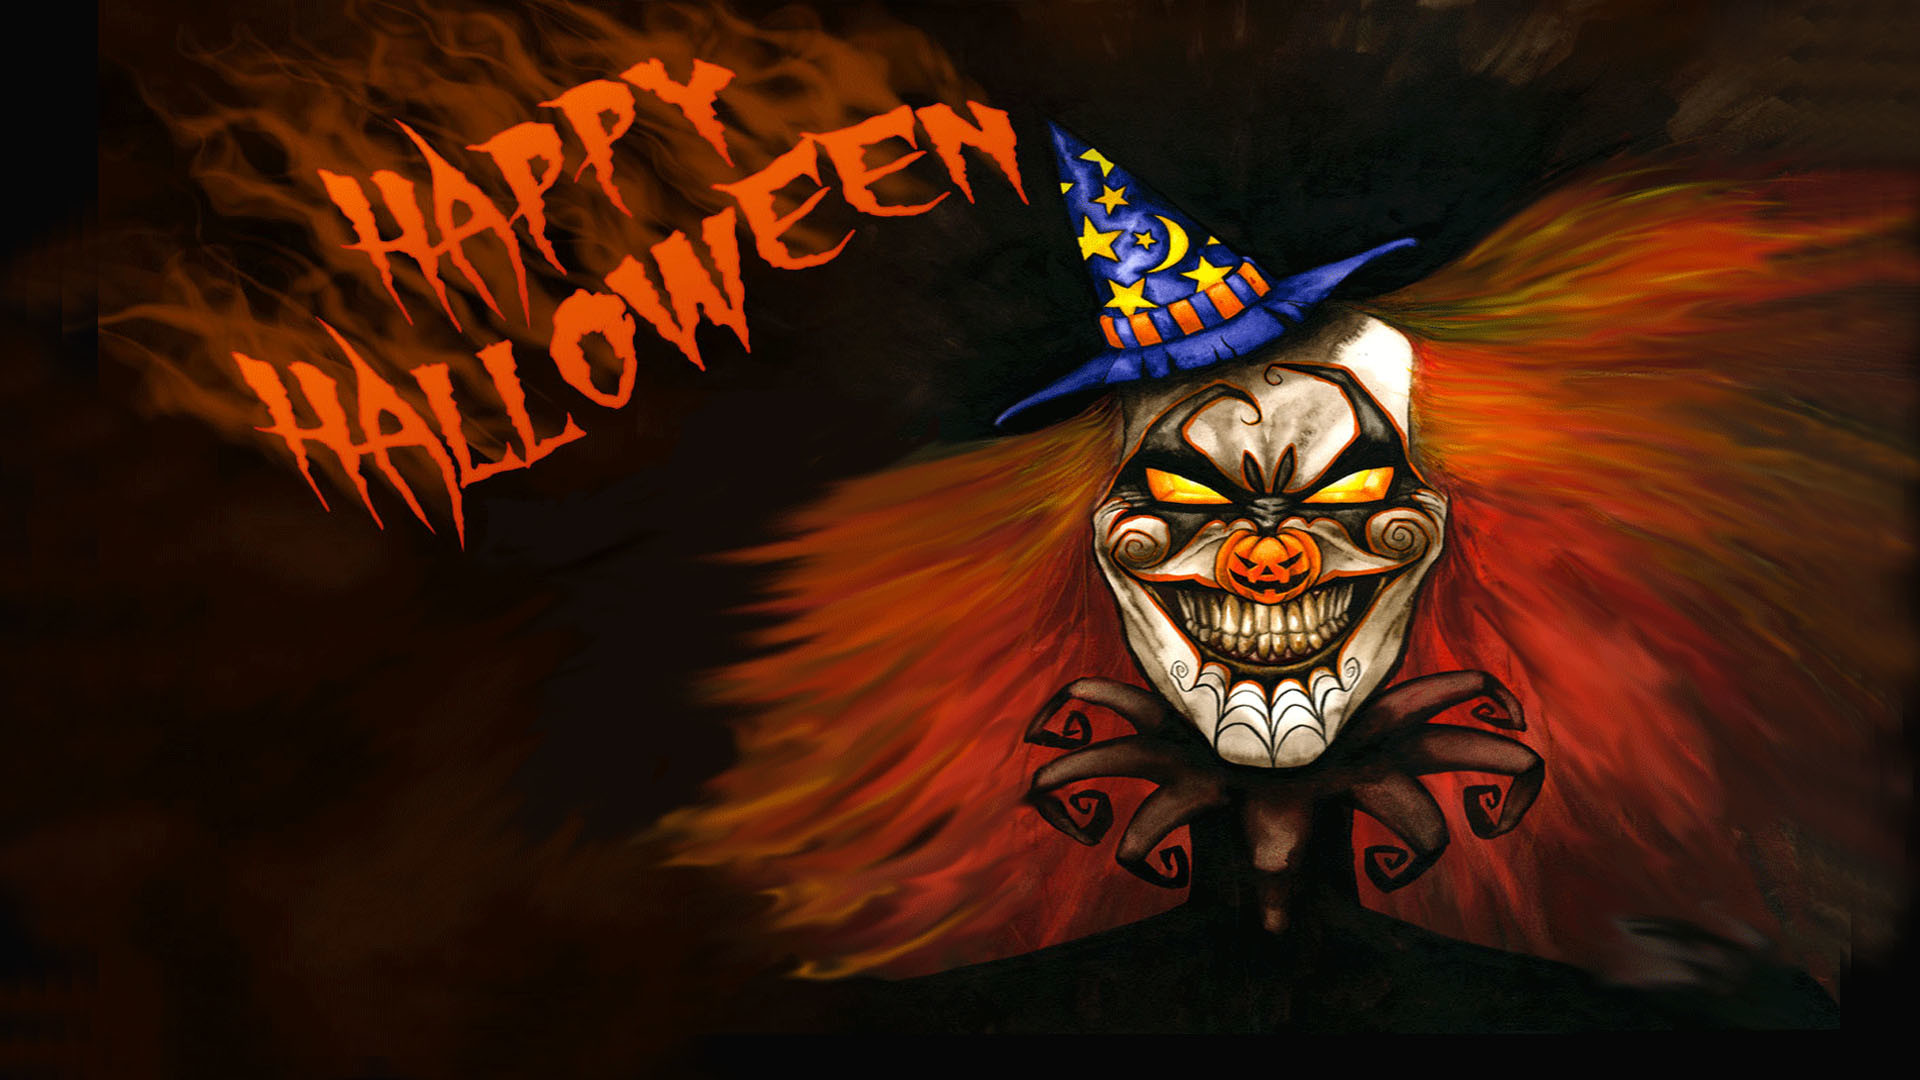 1920x1080 Free Download Scary Halloween Backgrounds | PixelsTalk.Net. Free Download  Scary Halloween Backgrounds PixelsTalk Net